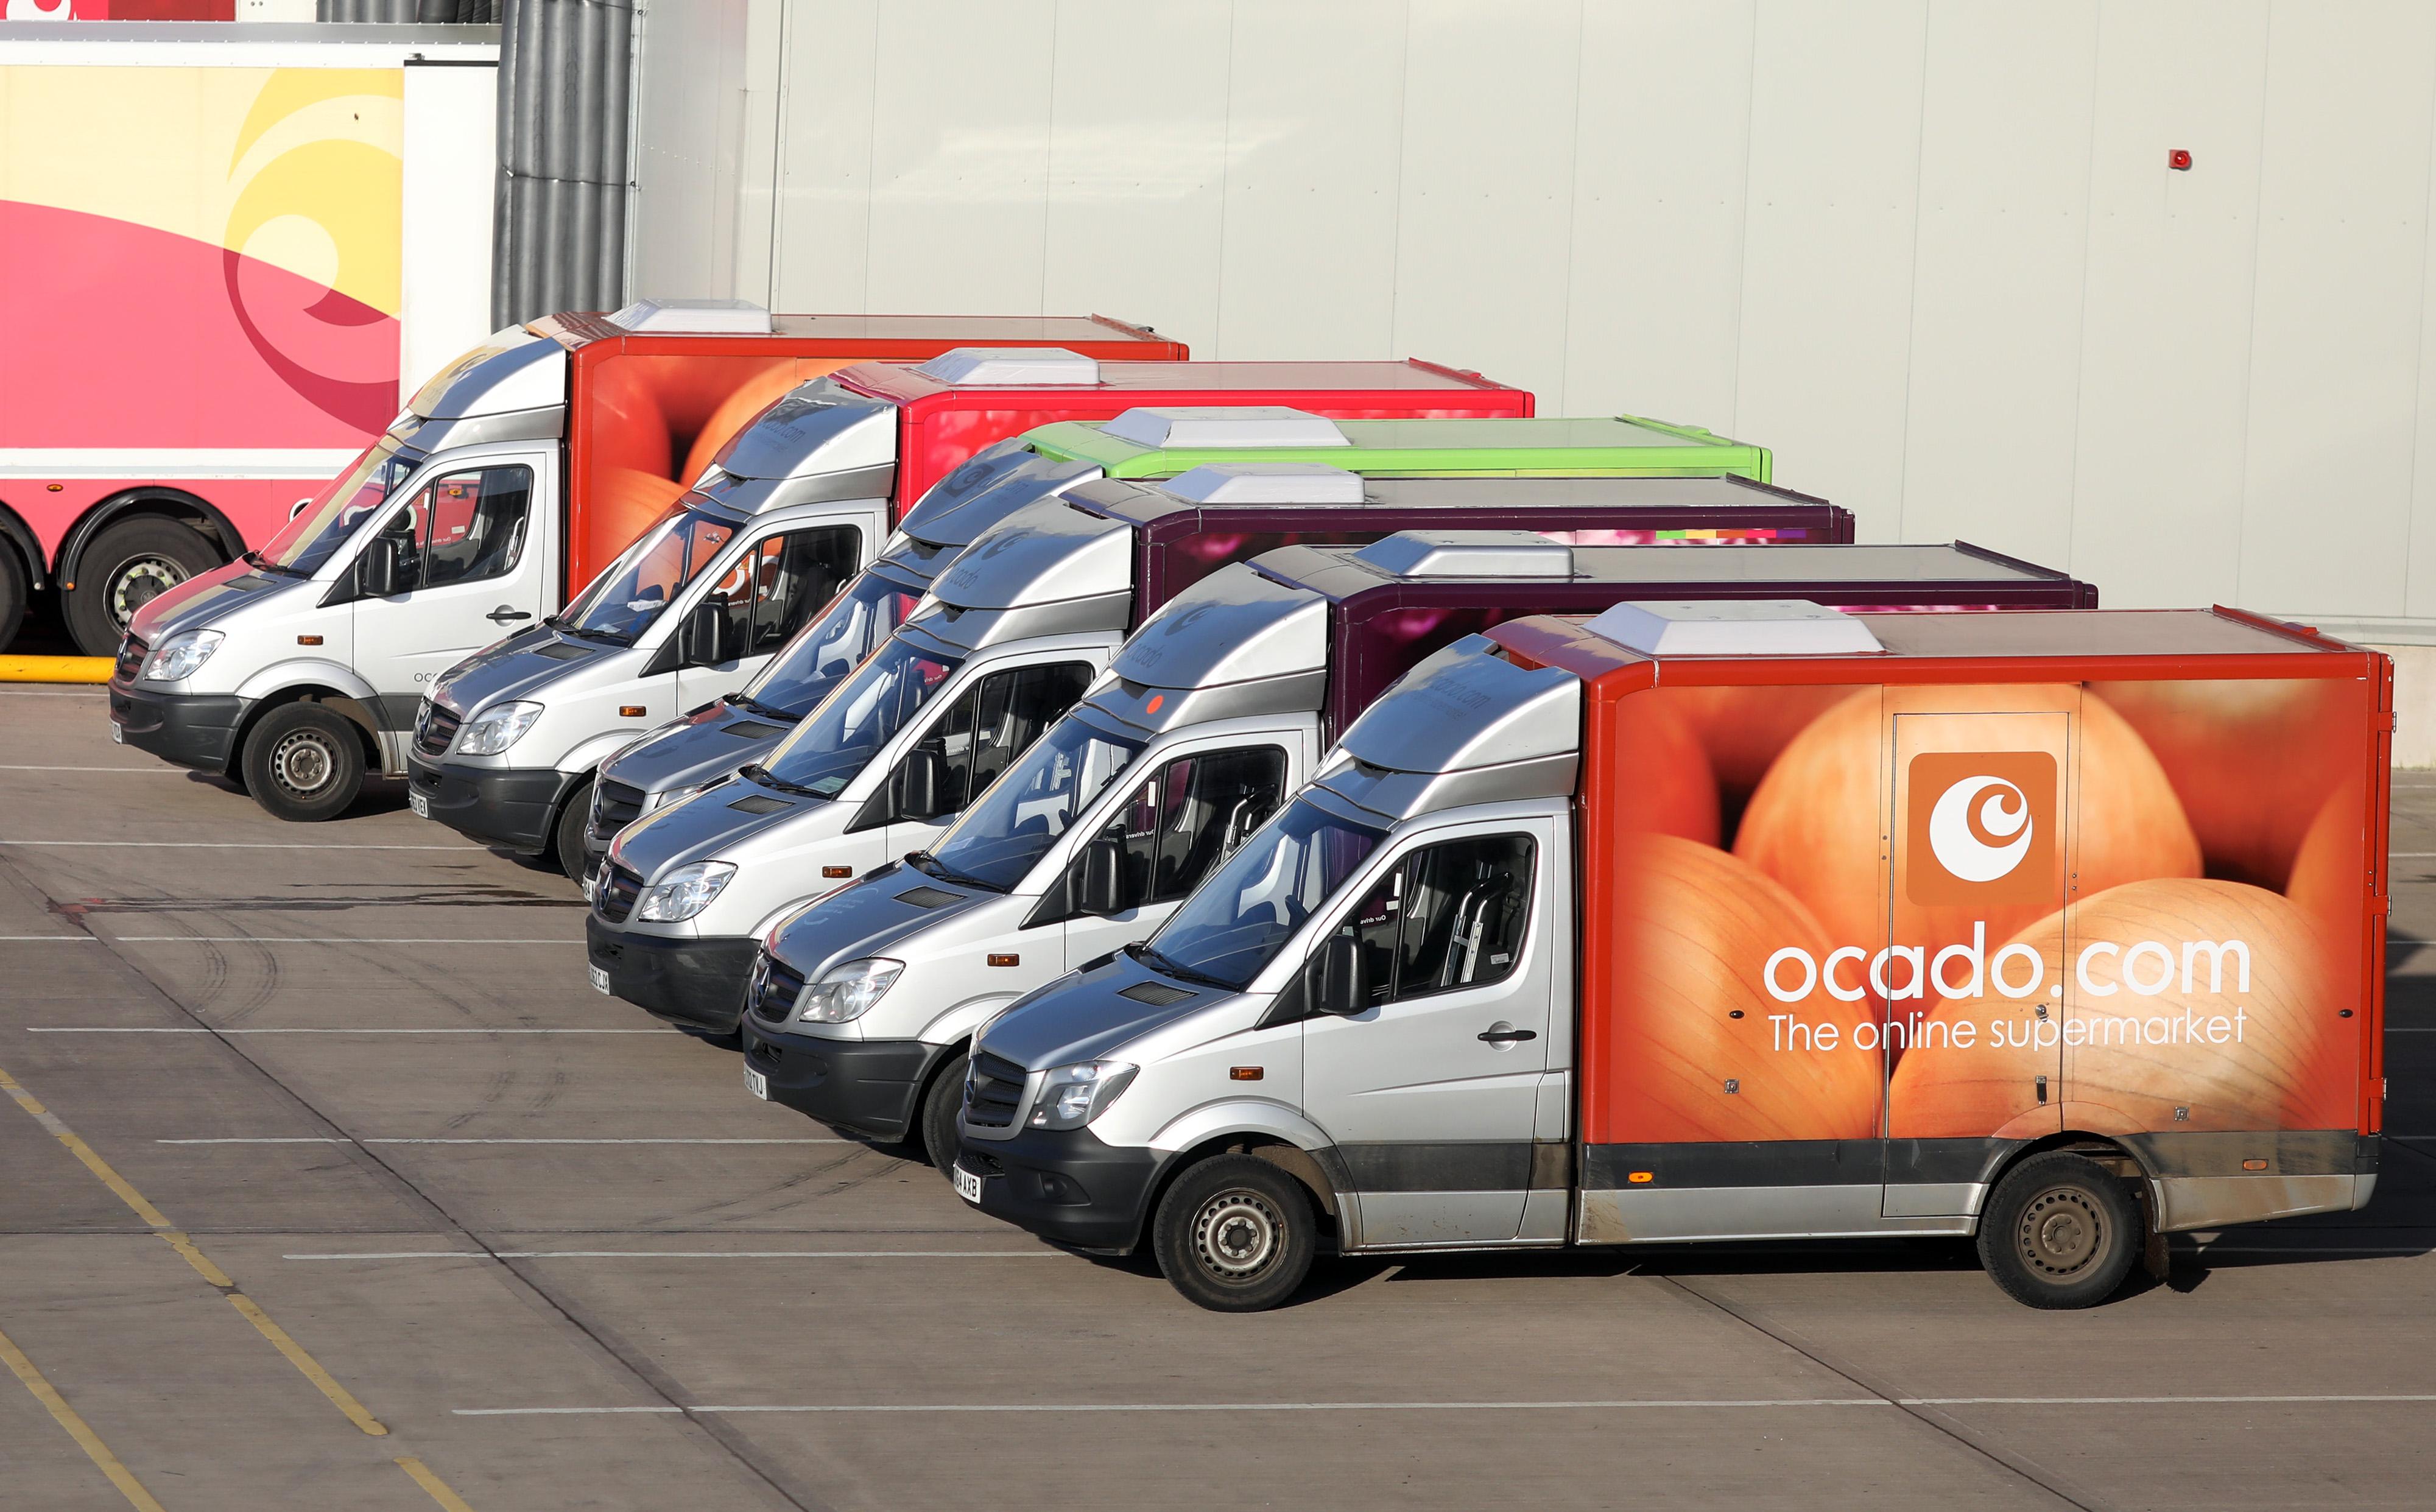 ocado-share-price-falls-after-sales-warning-following-warehouse-fire